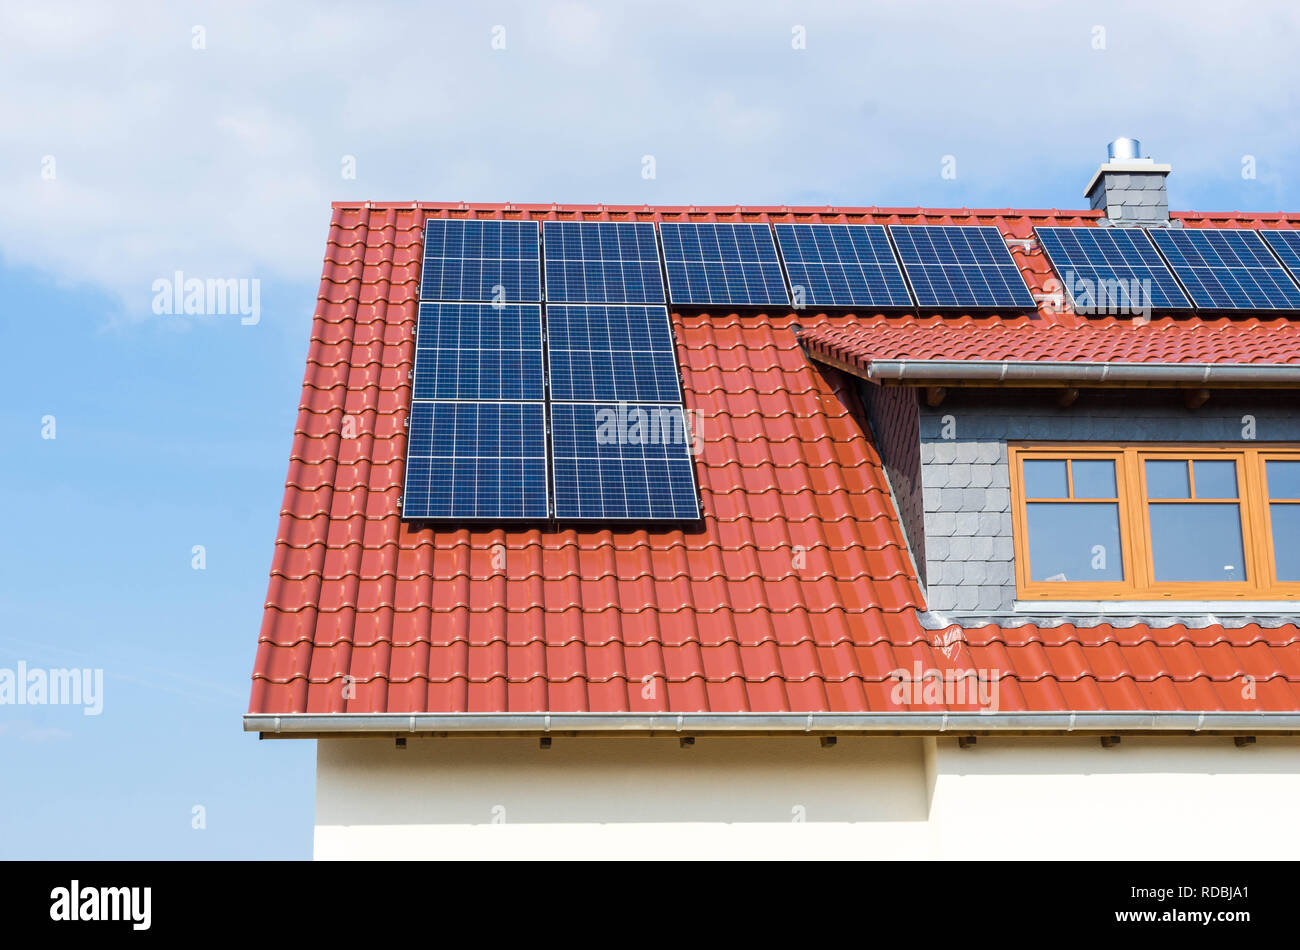 solar panels or photovoltaic power plant on a red tiled roof Stock Photo